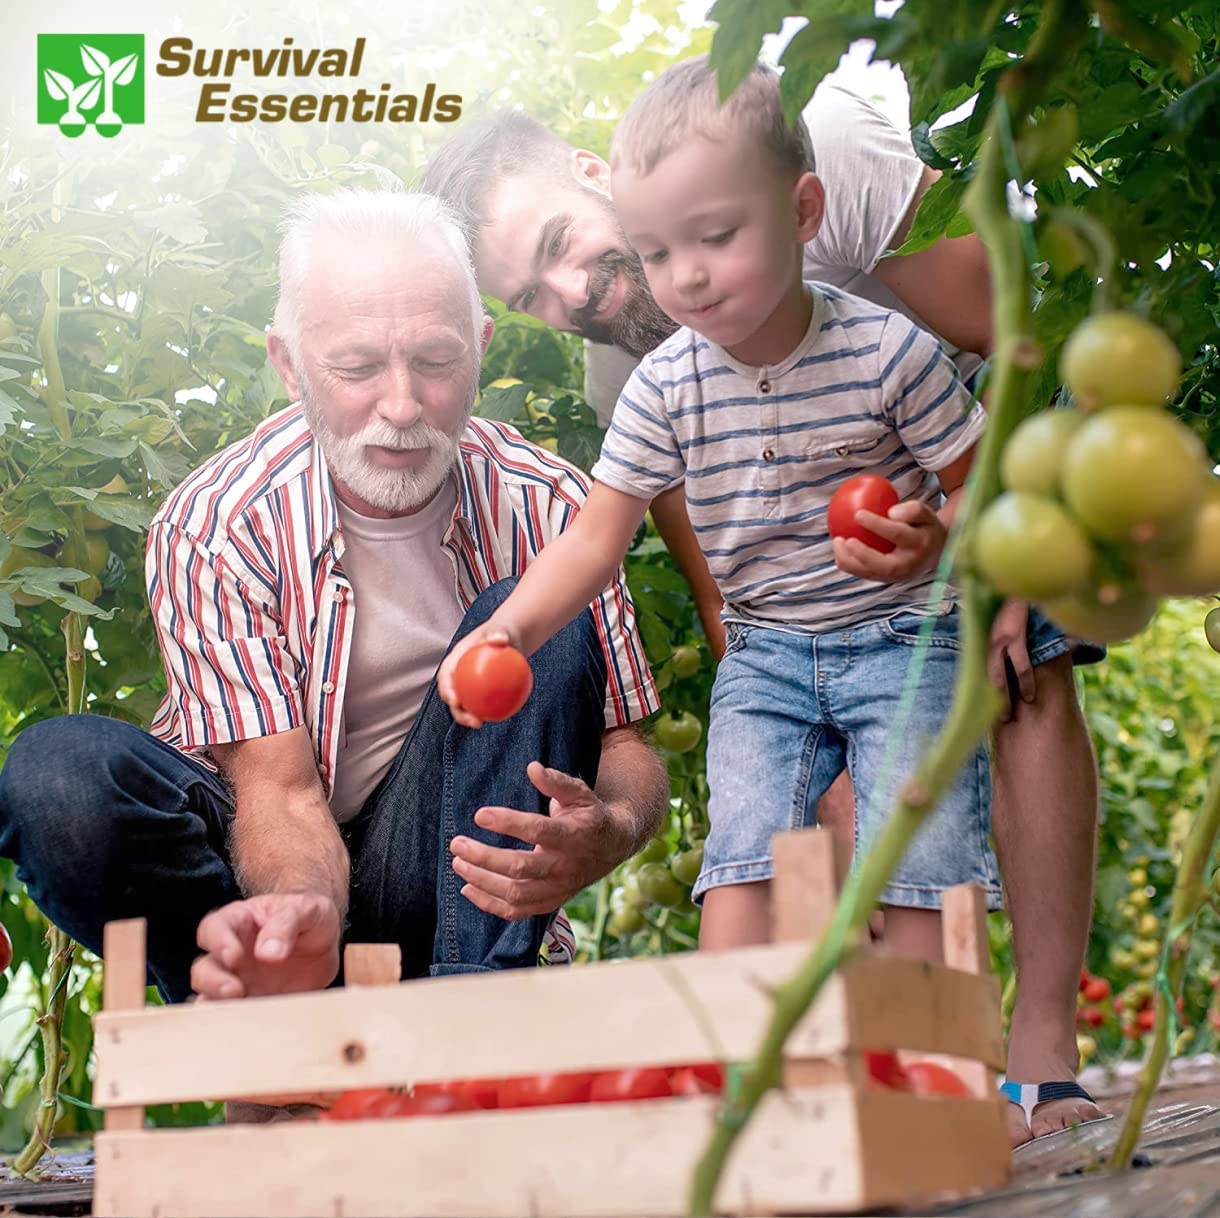 Image showing a multi-generational family gathering, with a grandfather, his son, and grandson harvesting ripe tomatoes together in a garden, symbolizing family bonding, tradition, and the joy of gardening across generations